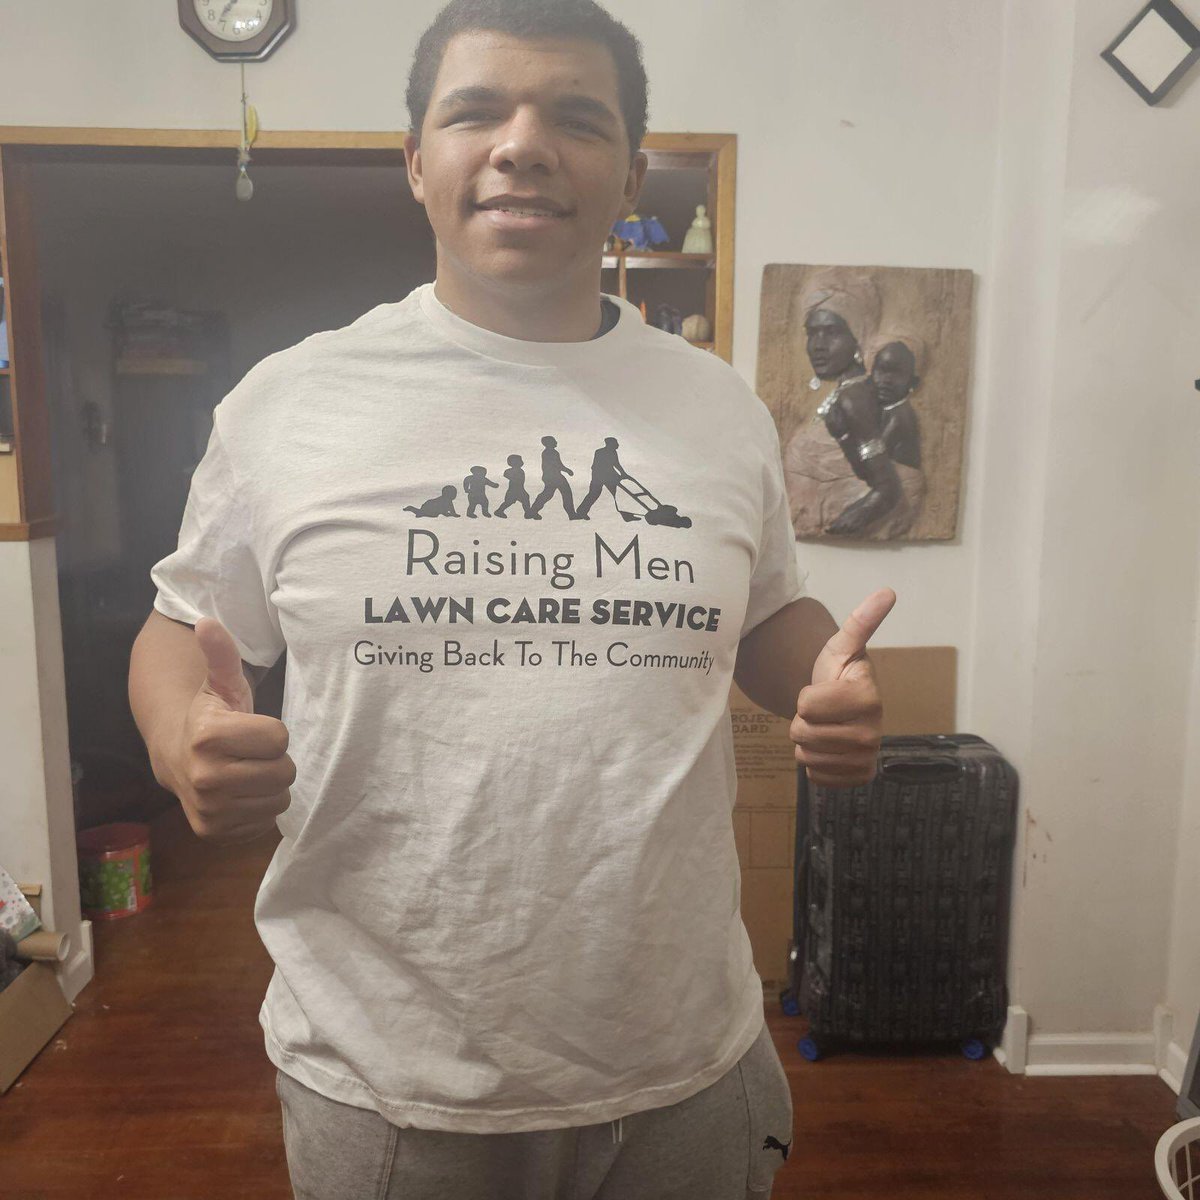 King David of Lewiston, ID who recently signed up for our 50-yard challenge received his starter pack in the mail which included his Raising Men shirt, safety glasses, and ear protection. He is now fully equipped and ready to take on the challenge ! Do you have any words of